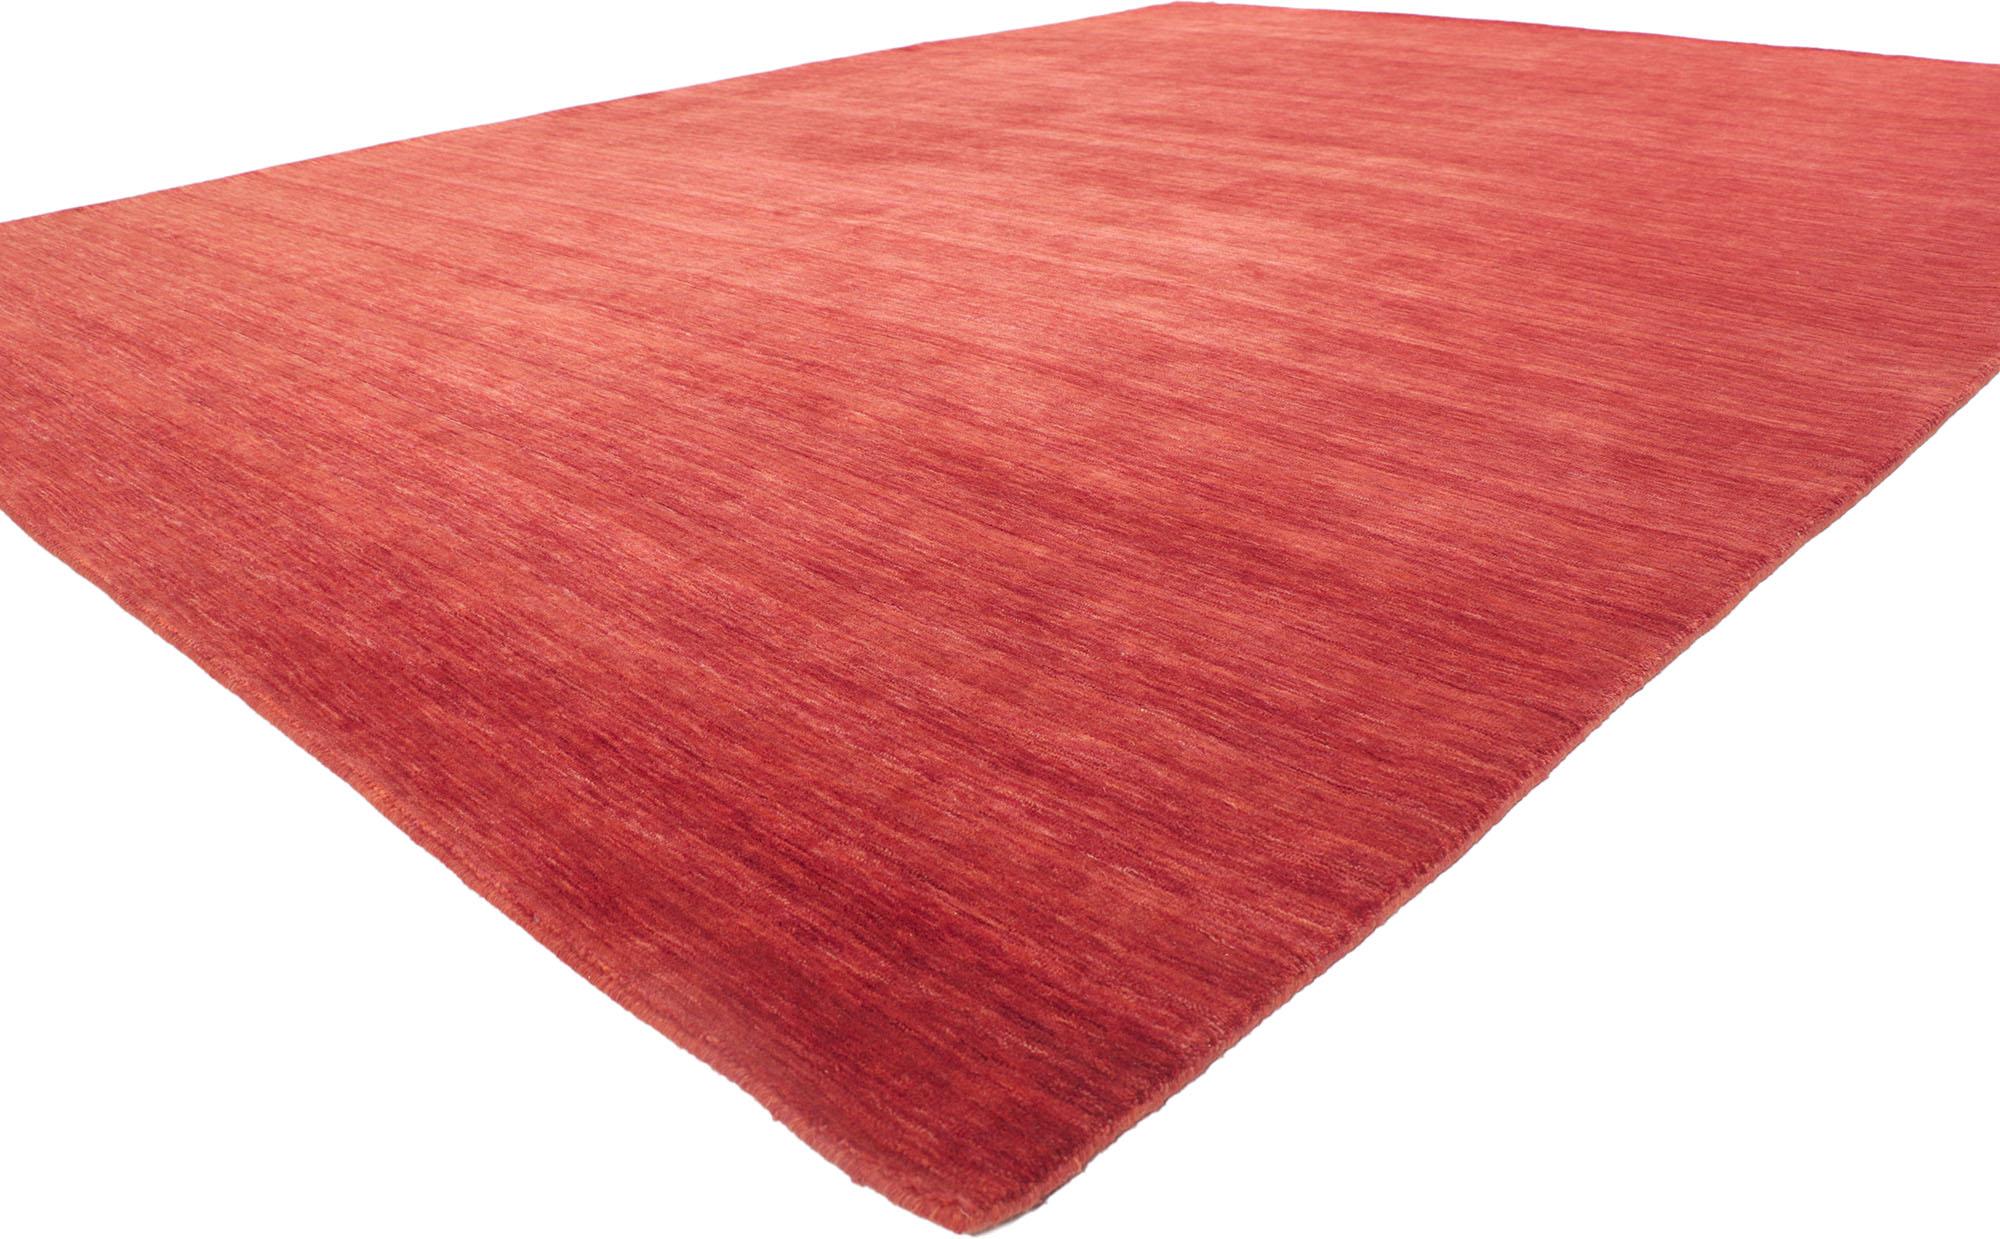 30728 New Contemporary Red Area rug with Modern Style 09'07 x 12'10. Effortless, elegant, and casual meets the eye in this contemporary Indian area rug. It features gorgeous red hues and softly gradated striations running selvage to selvage blending